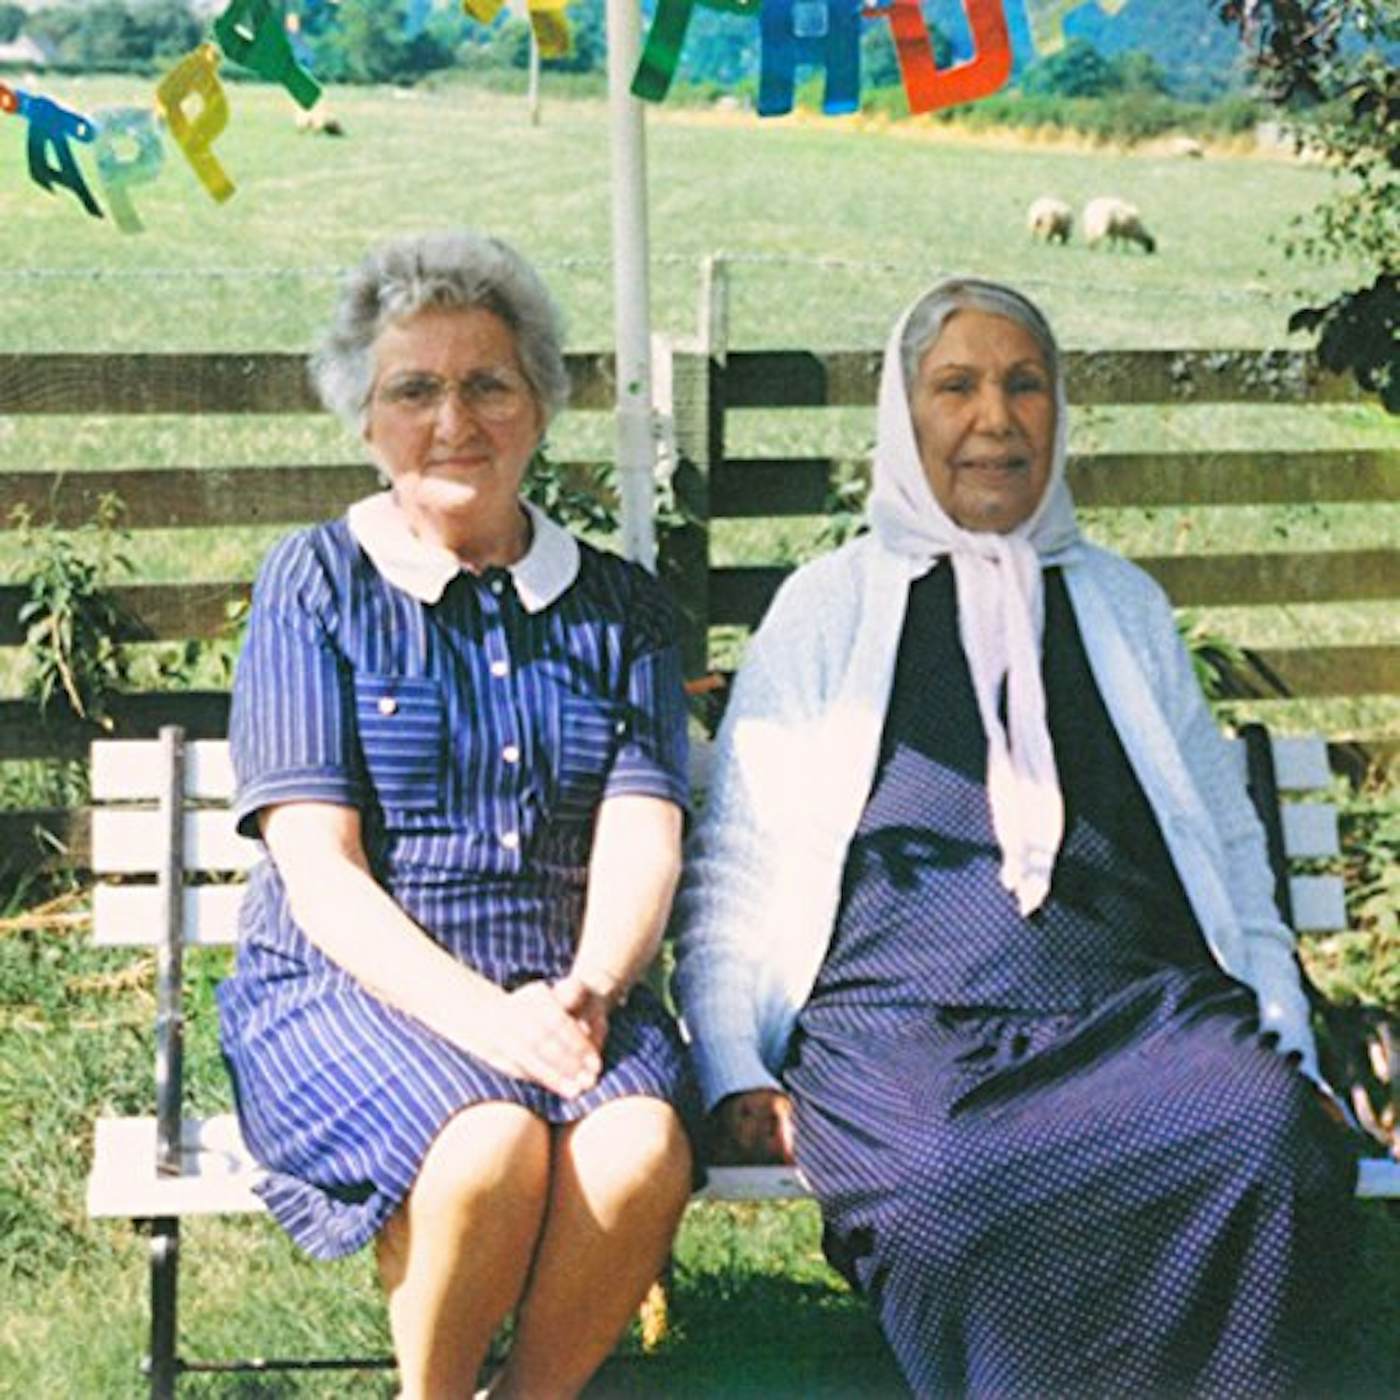 Dauwd THEORY OF COLOURS CD